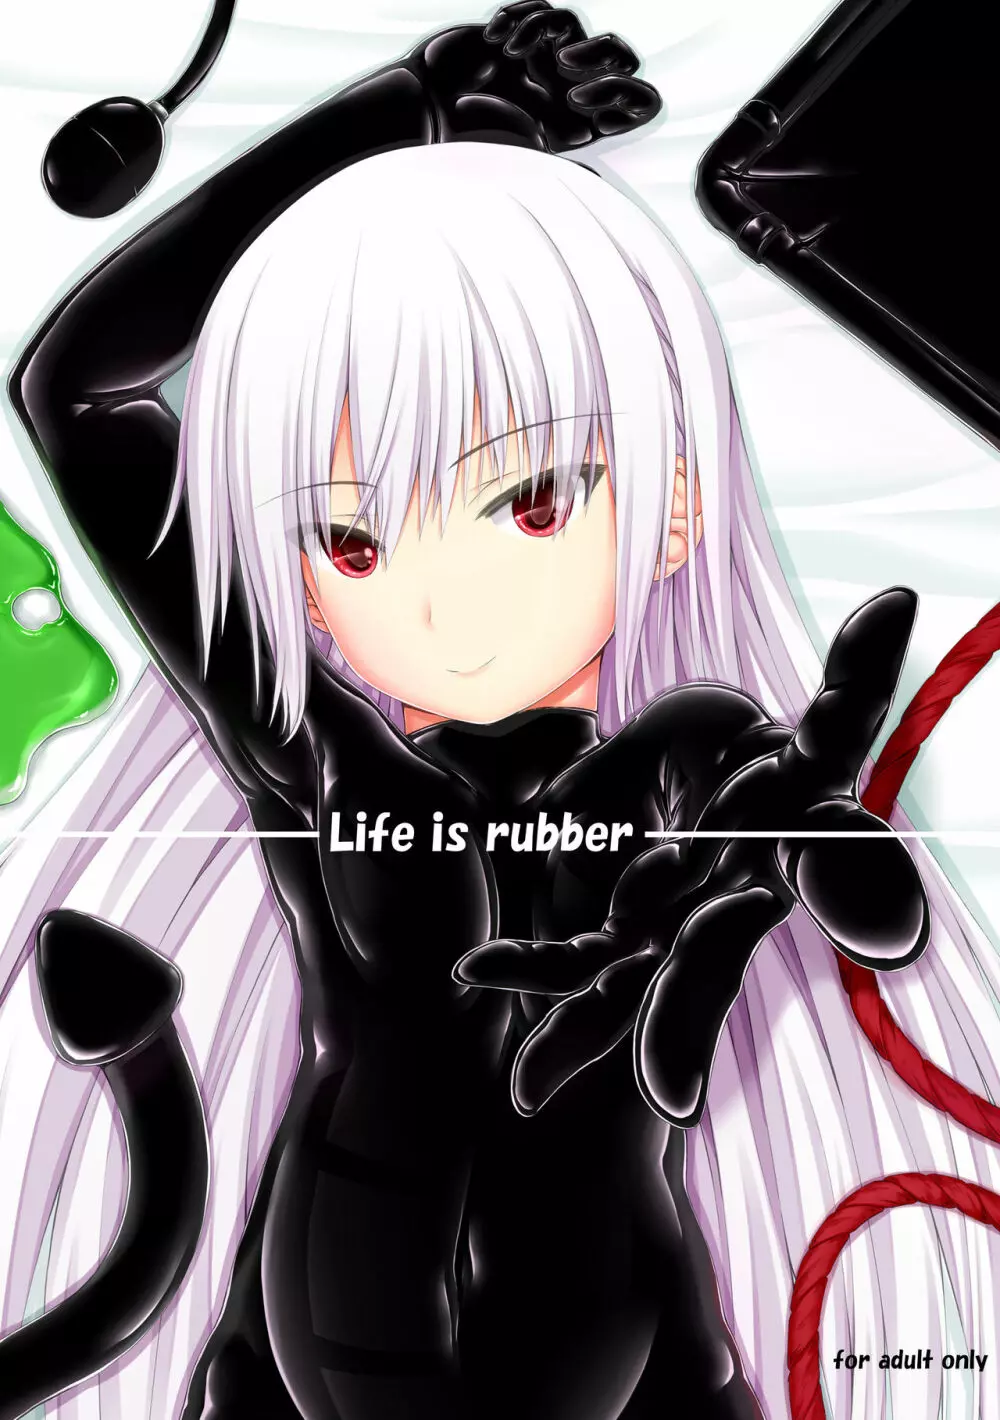 Life is rubber ver.1 & 2